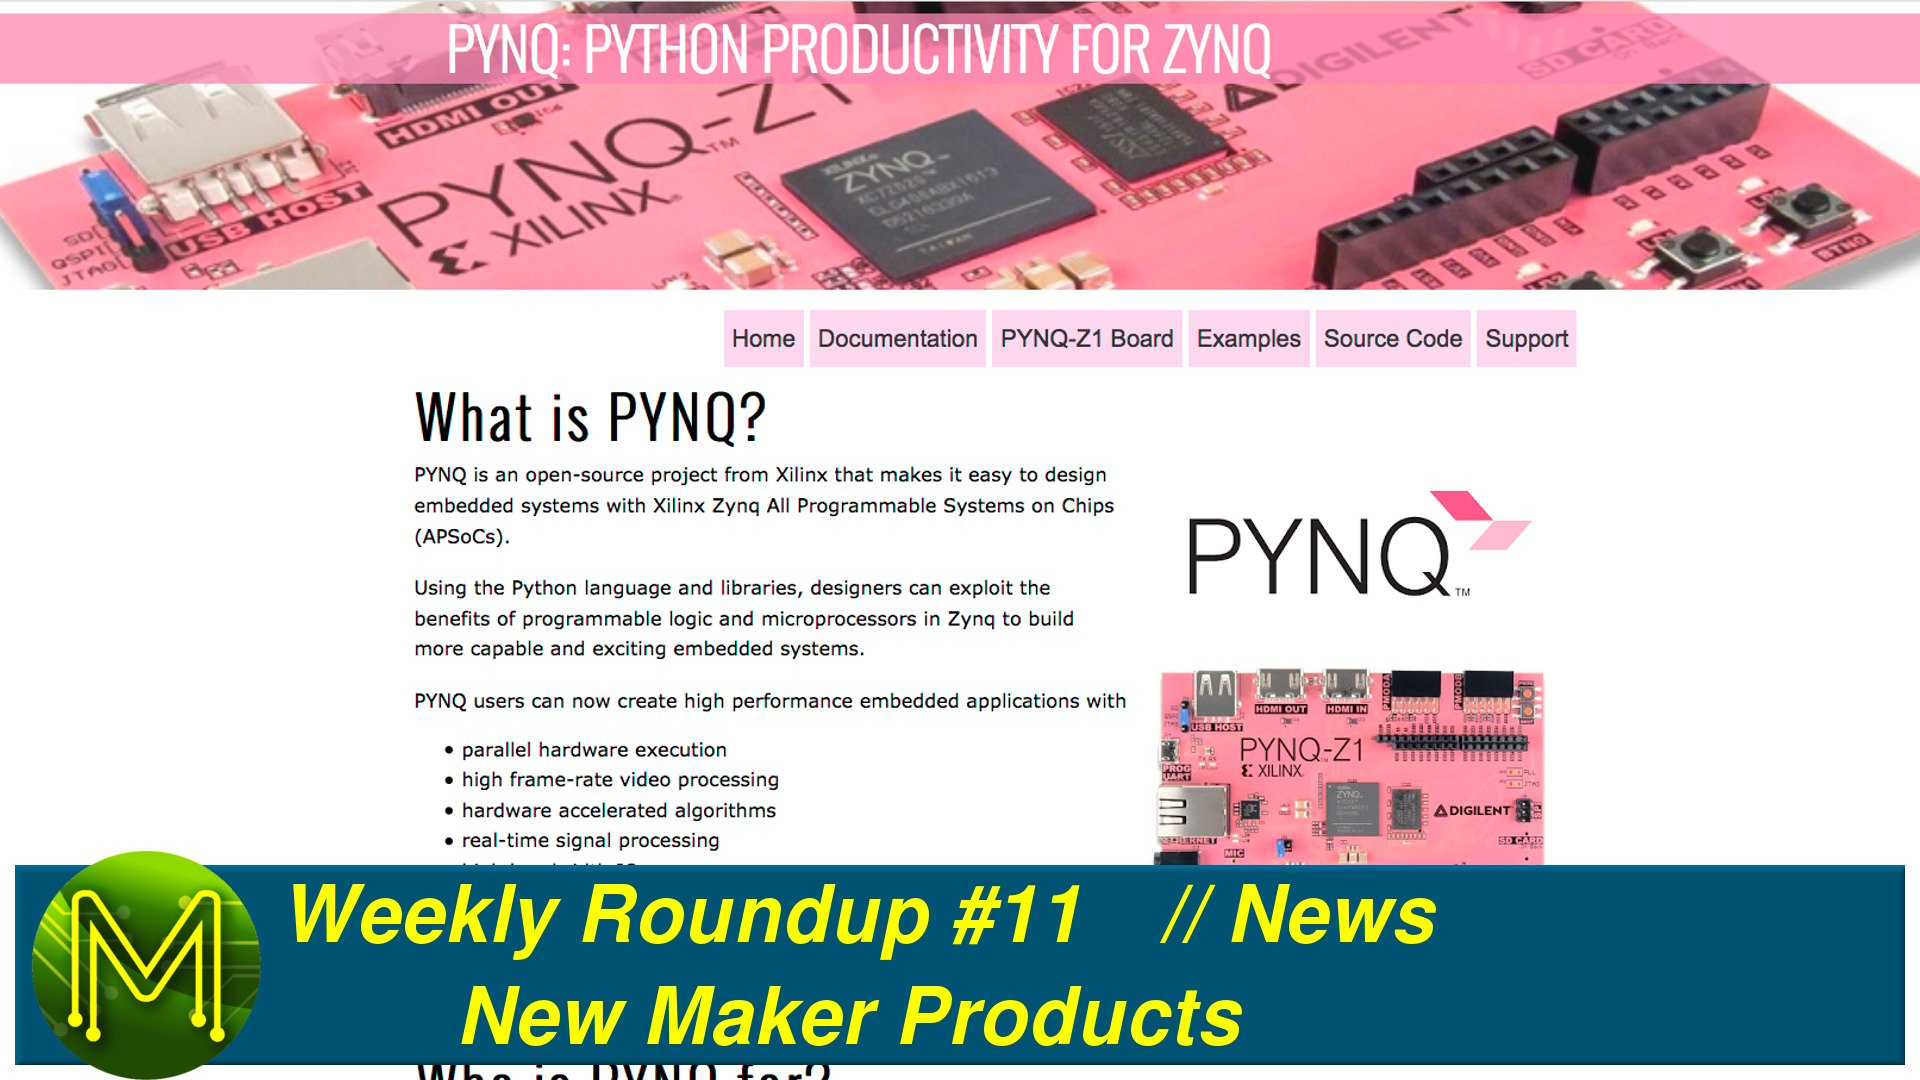 Weekly Roundup #11 - New Maker Products // News